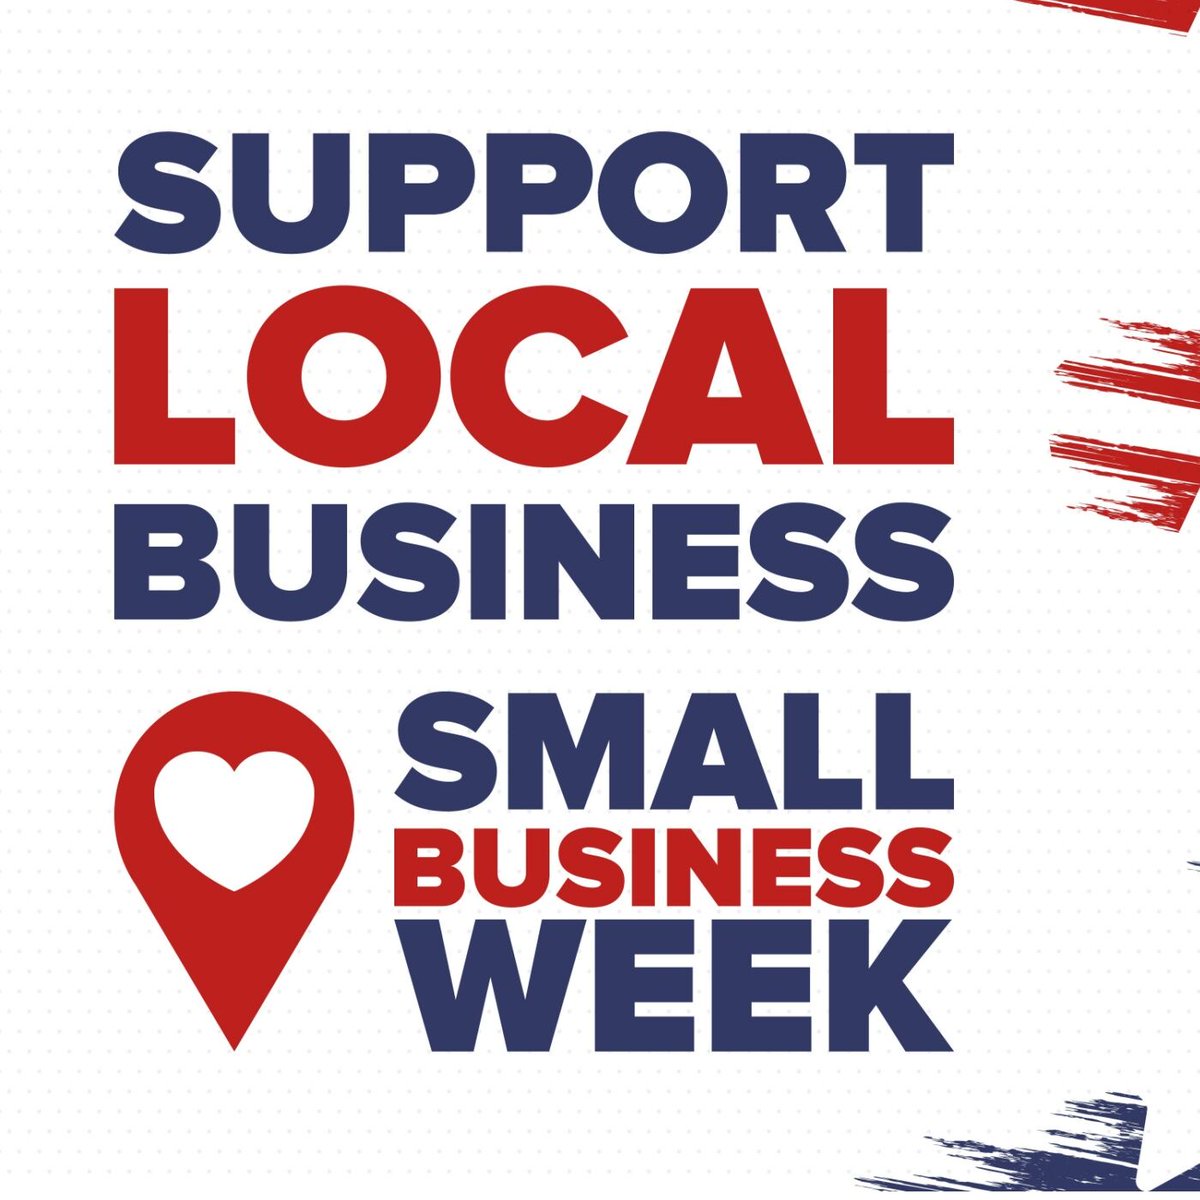 It's #NationalSmallBusinessWeek! Small businesses face unique challenges in providing #employeebenefits. Here are three benefit programs that can help.
bit.ly/4a1Yohc